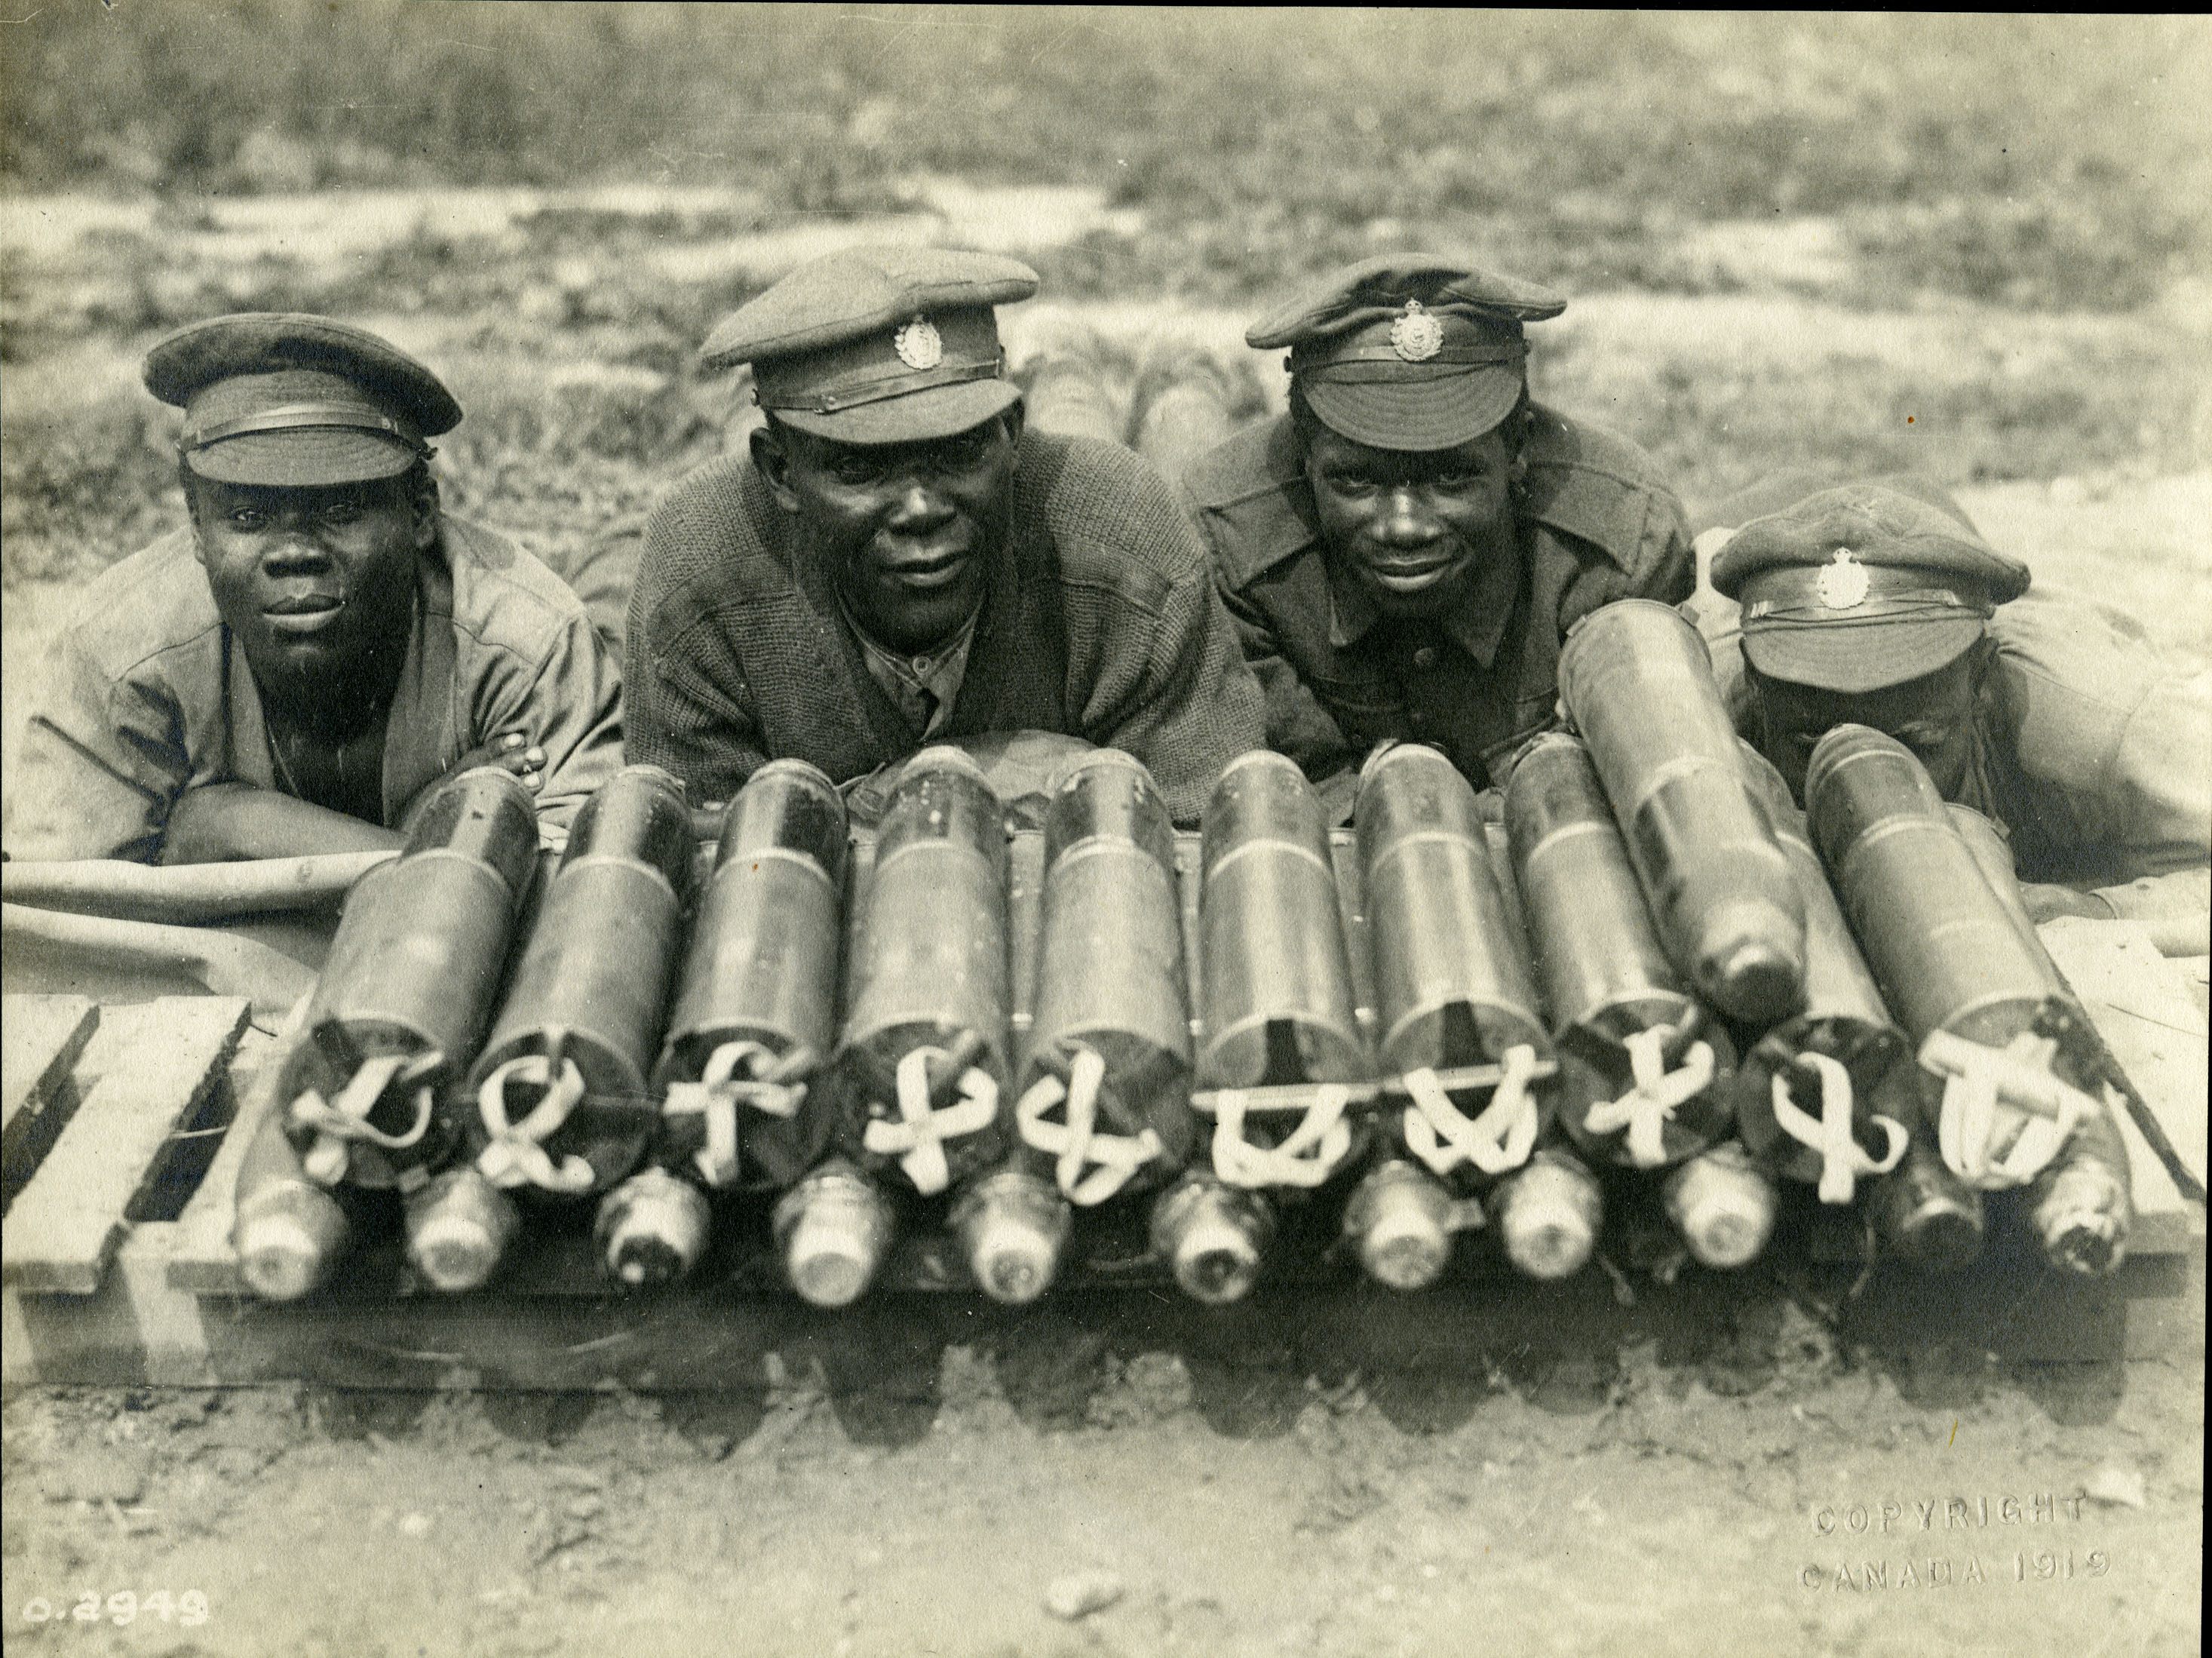 HISTORIC - Canadian soldiers with a pile of artillery shells on the front in Northern France